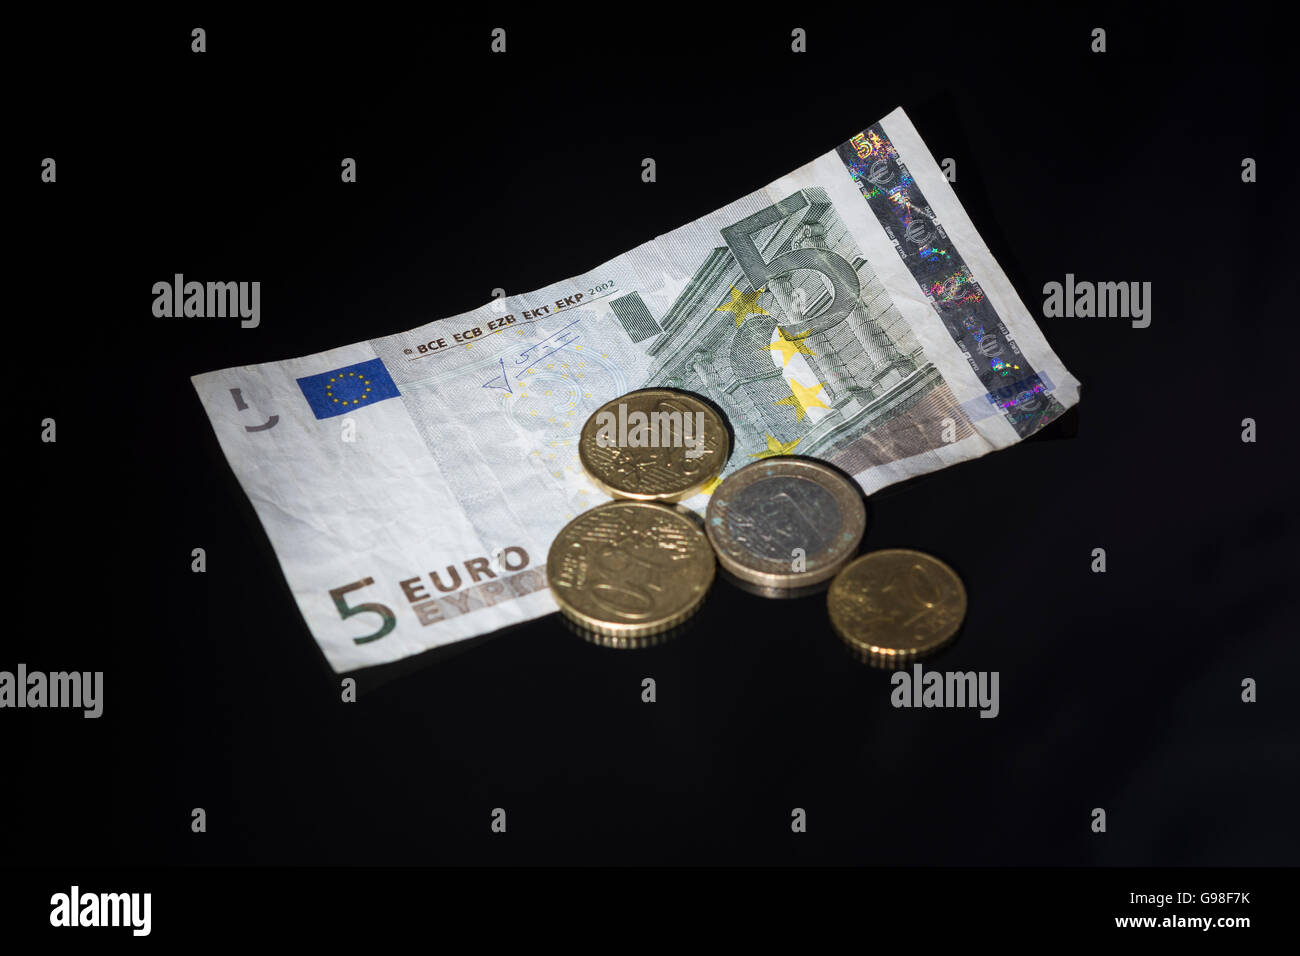 Concept of Euro zone, single market represented by a bundle of 5 Euro banknote and coins. Stock Photo